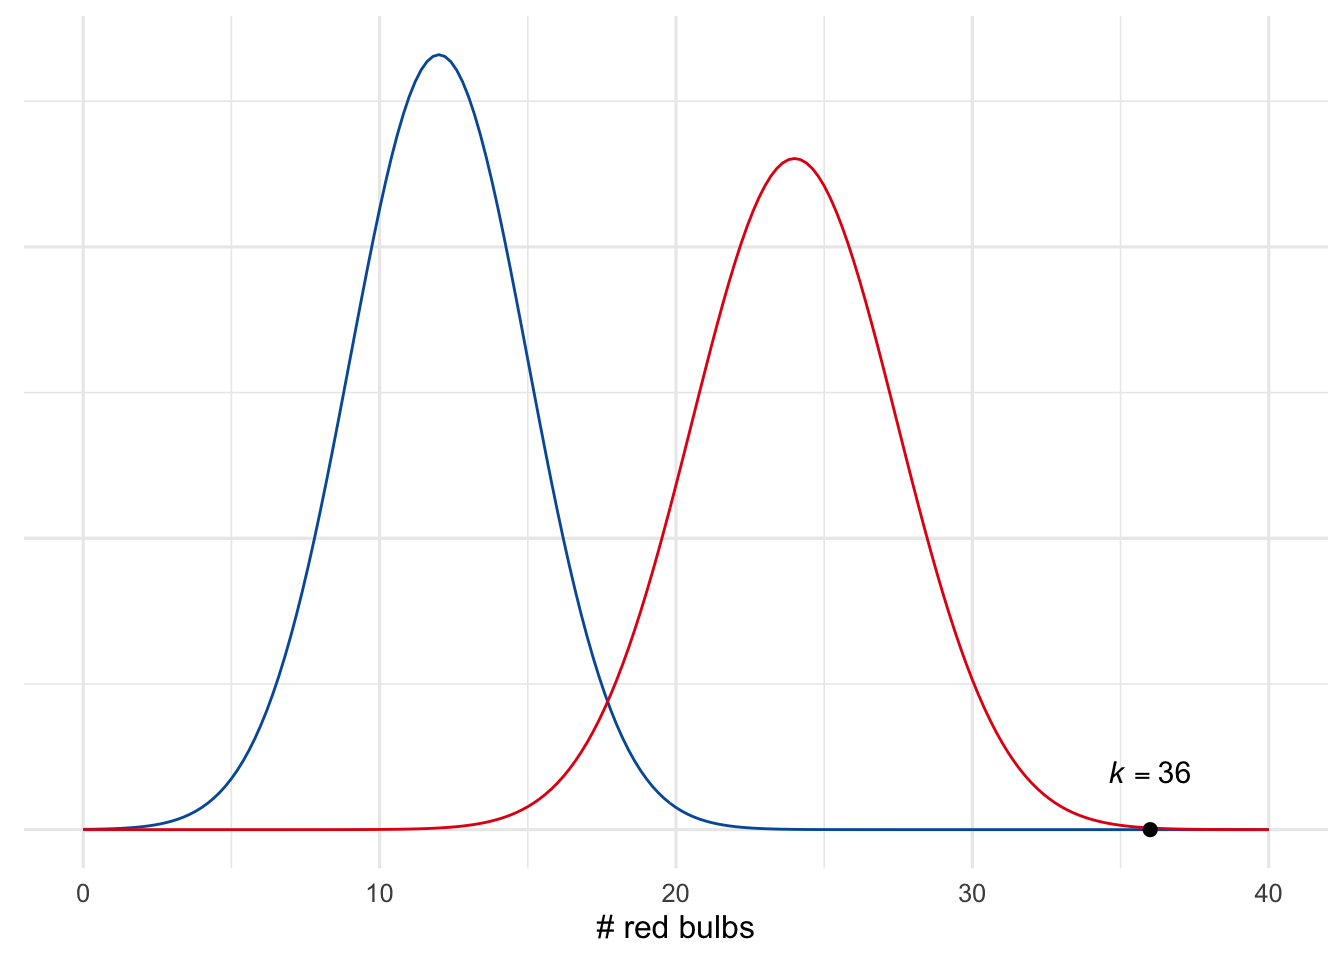 An illustration of Lindley's paradox. The finding $k = 36$ doesn't fit well with either hypothesis, so both are rejected. But it fits one of them (red) much better than the other (blue). So the red hypothesis is more plausible from an intuitive perspective.